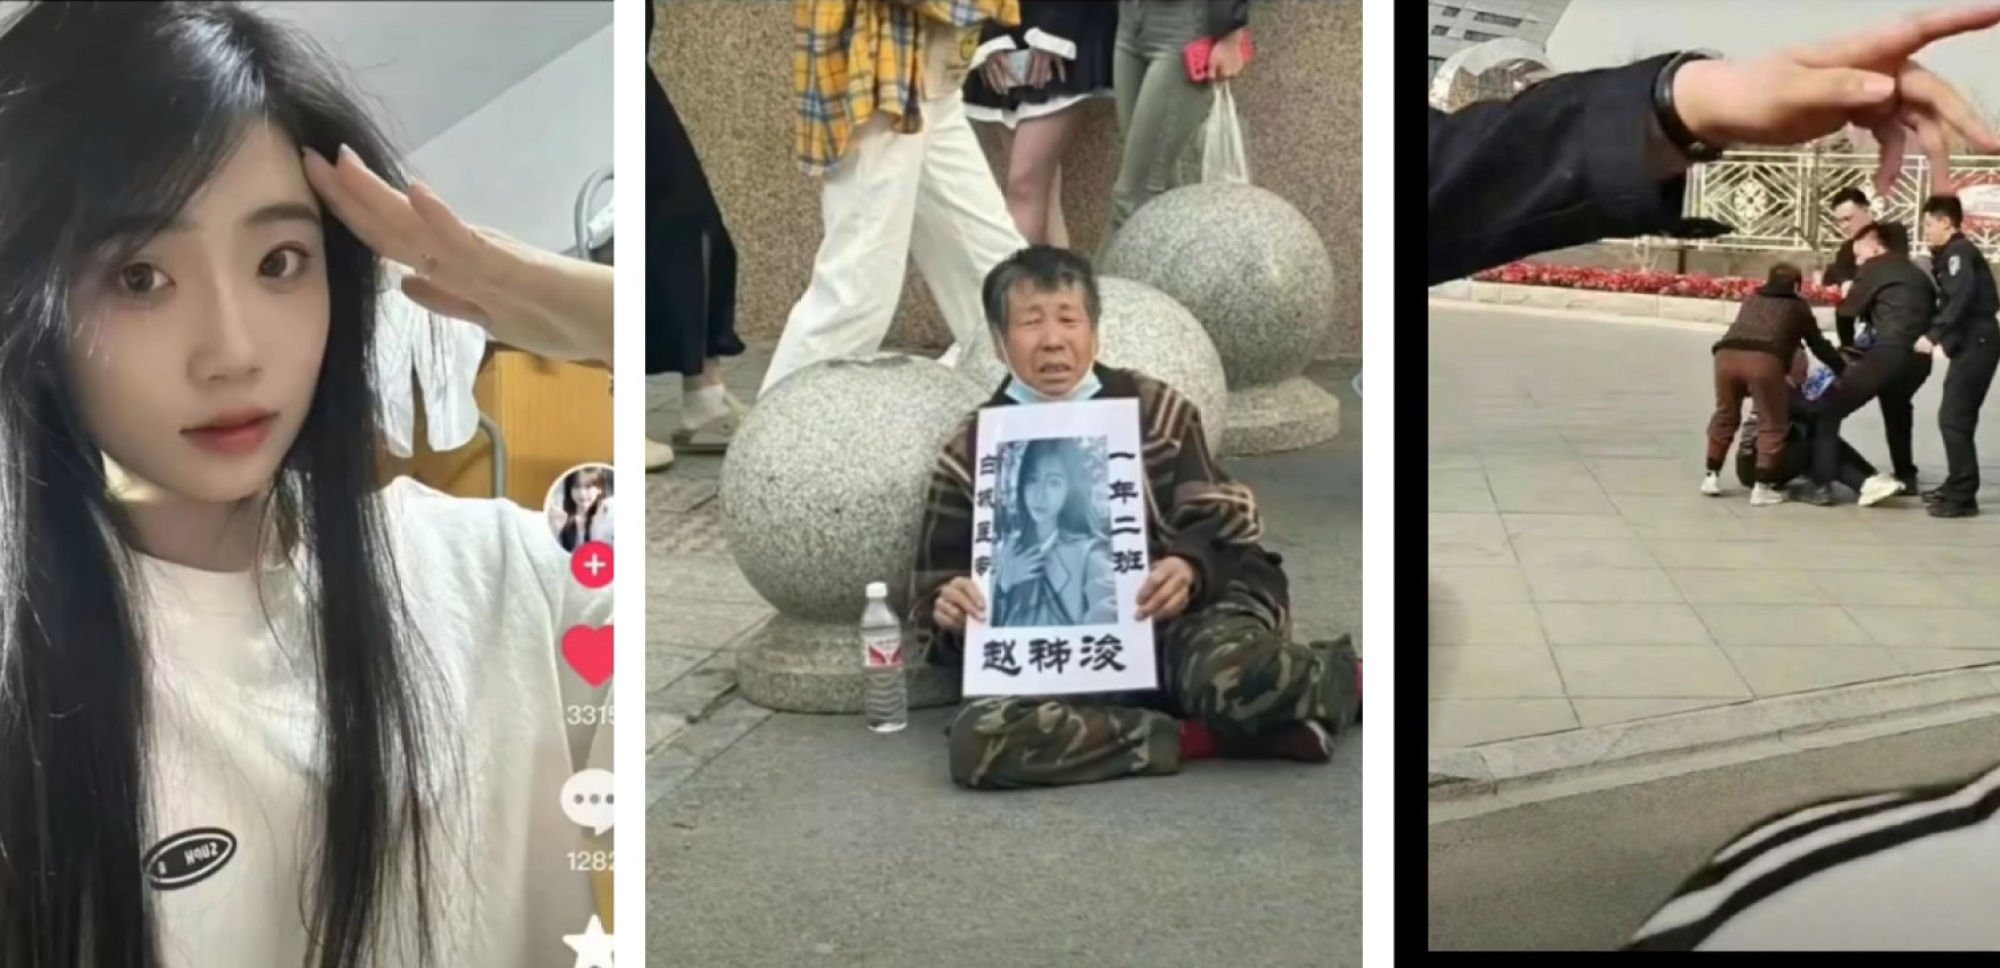 Teenager in China dies of heart attack after teacher forces her to exercise, insists illness is ‘fake’, delays first aid, enrages mainland social media